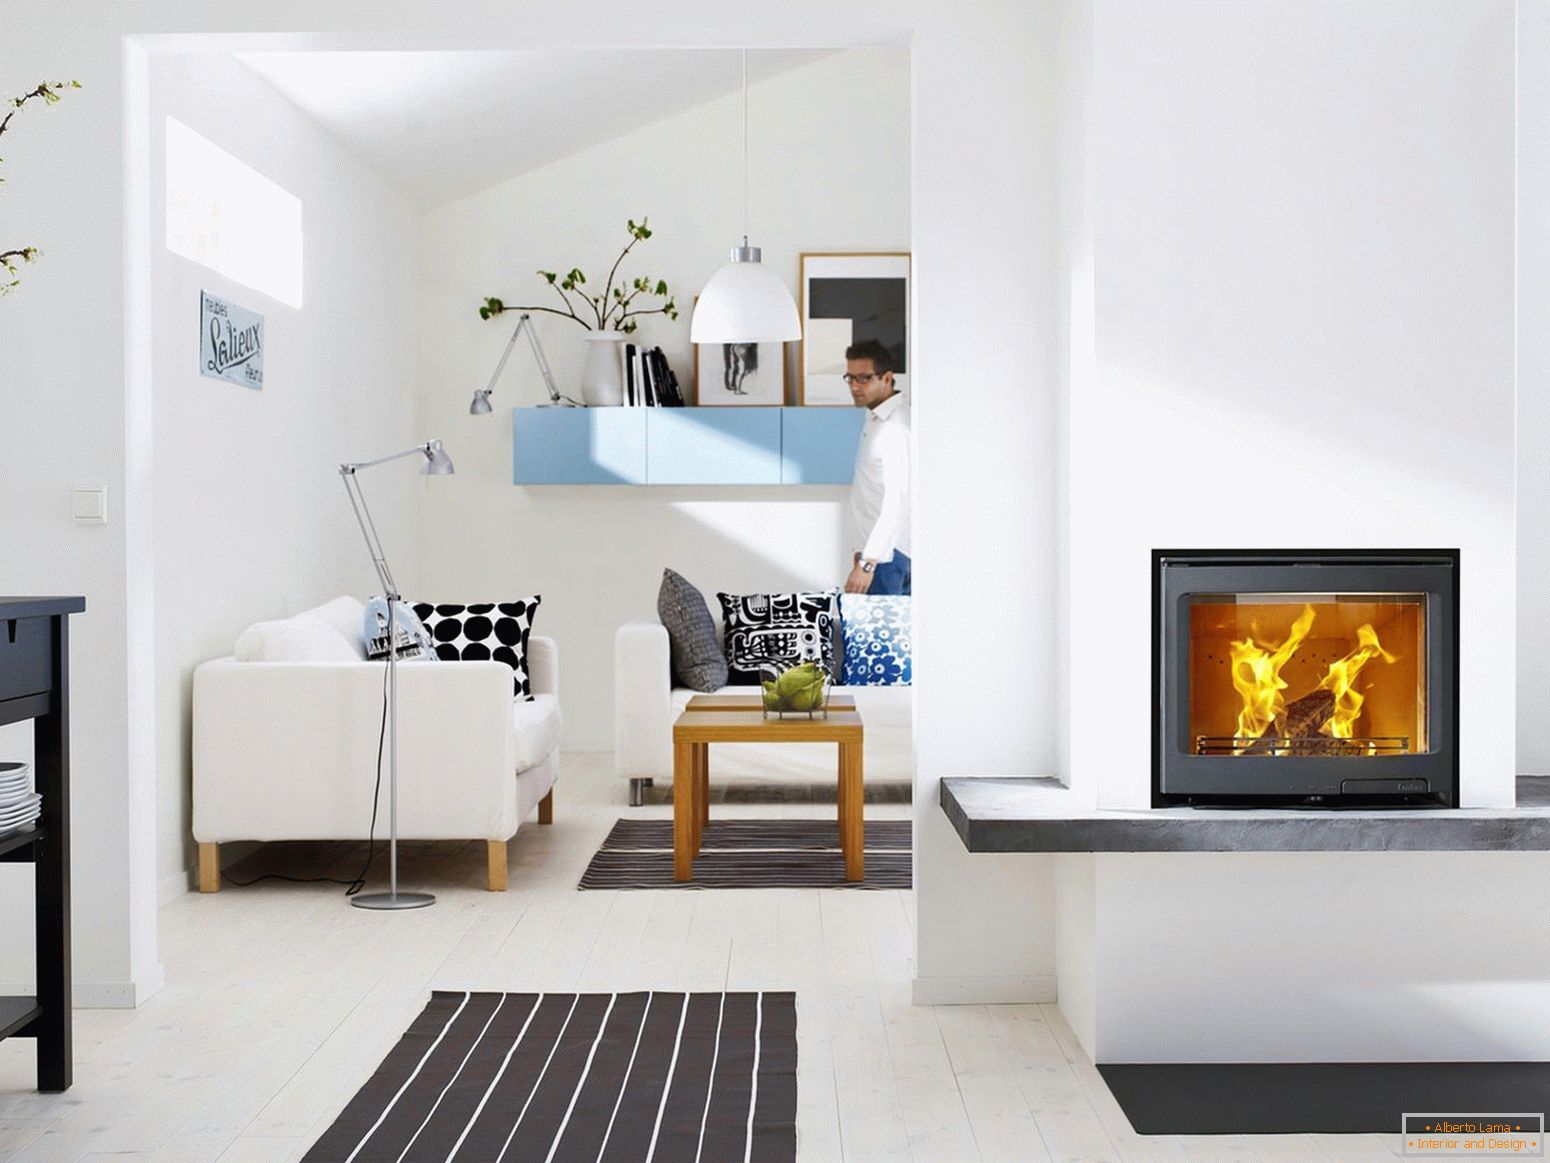 Fireplace in white interior